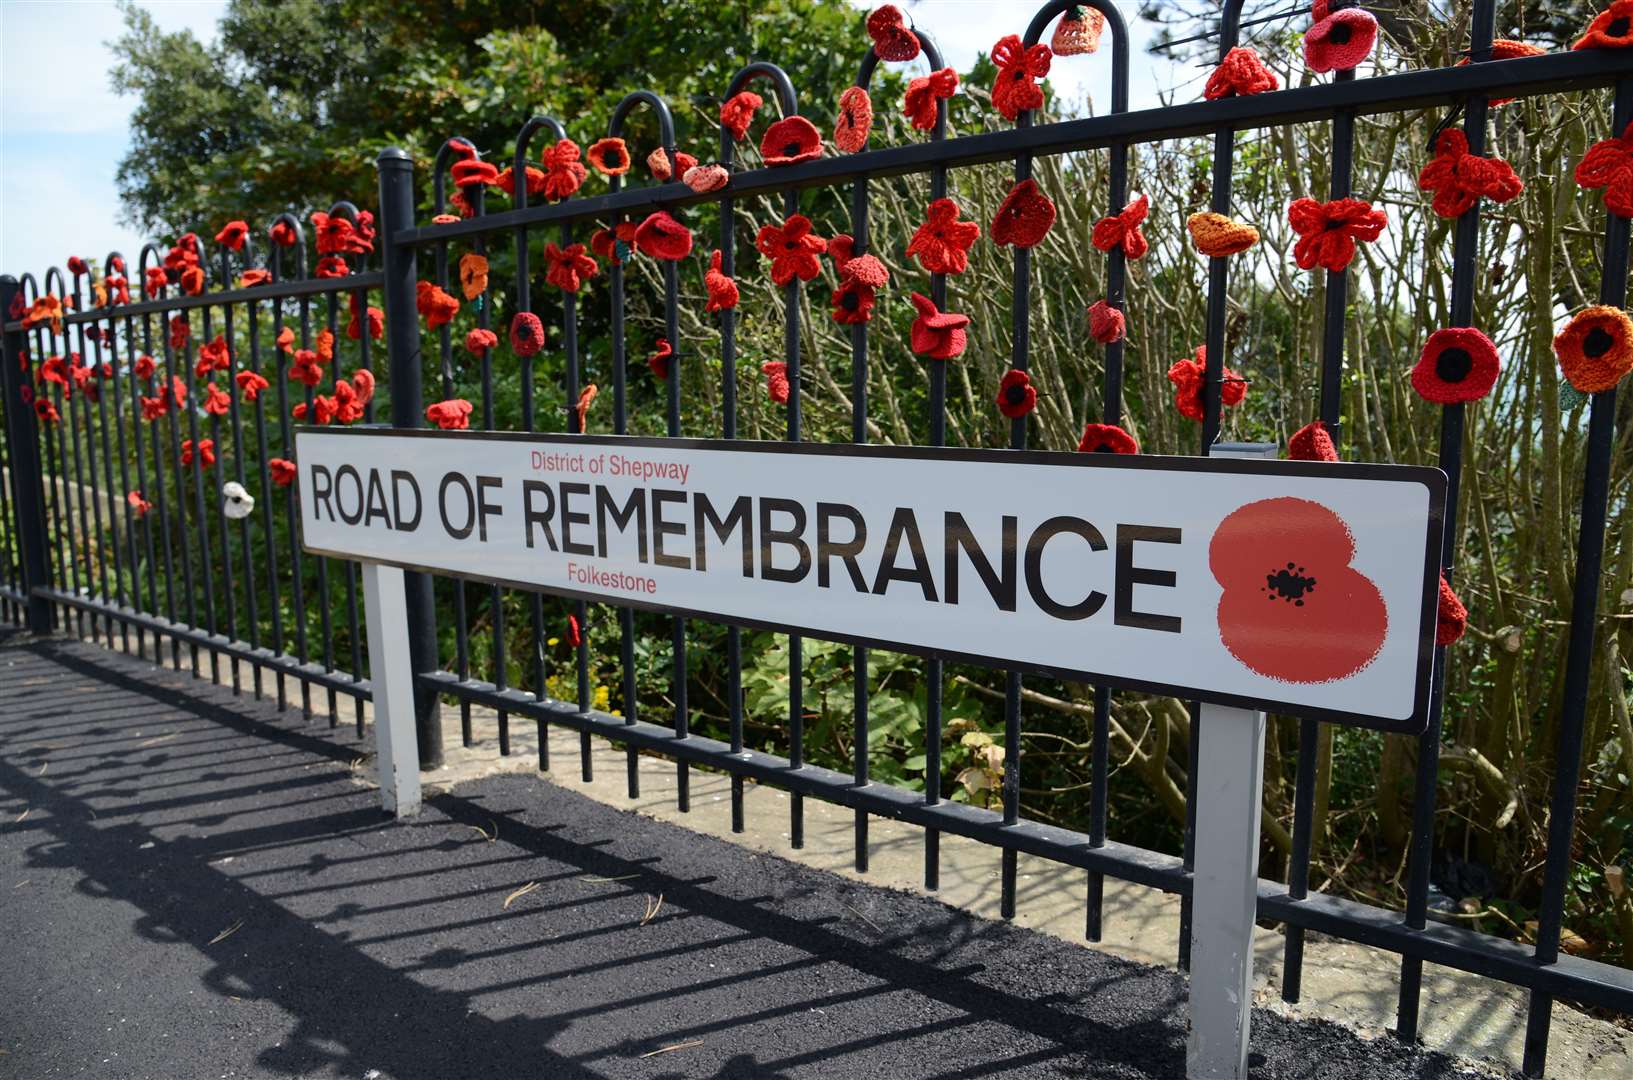 The Road of Remembrance in Folkestone. Picture: Gary Browne